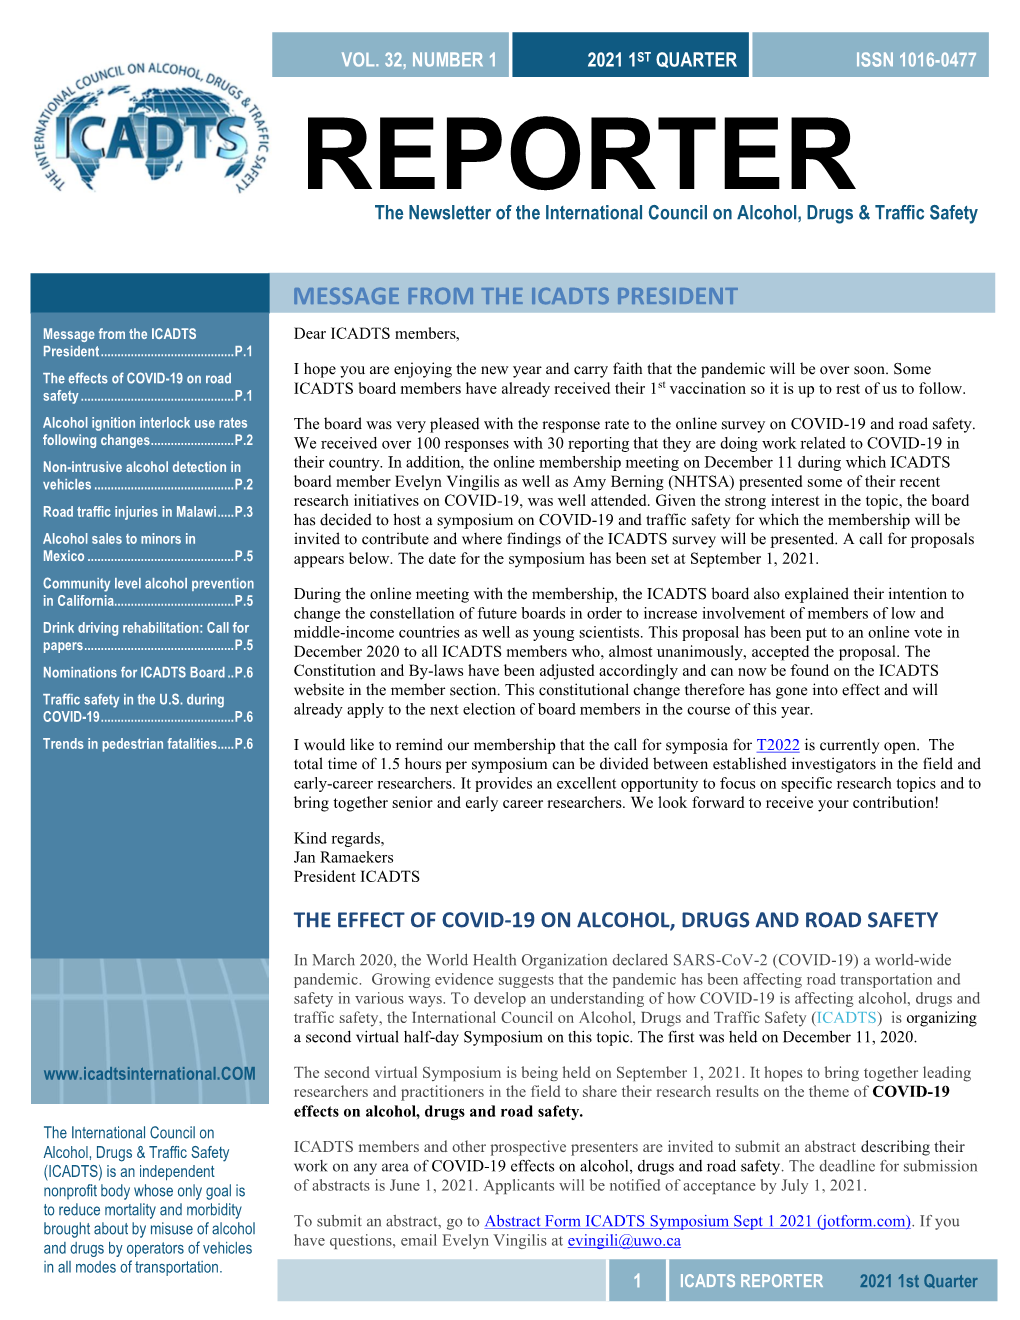 REPORTER the Newsletter of the International Council on Alcohol, Drugs & Traffic Safety